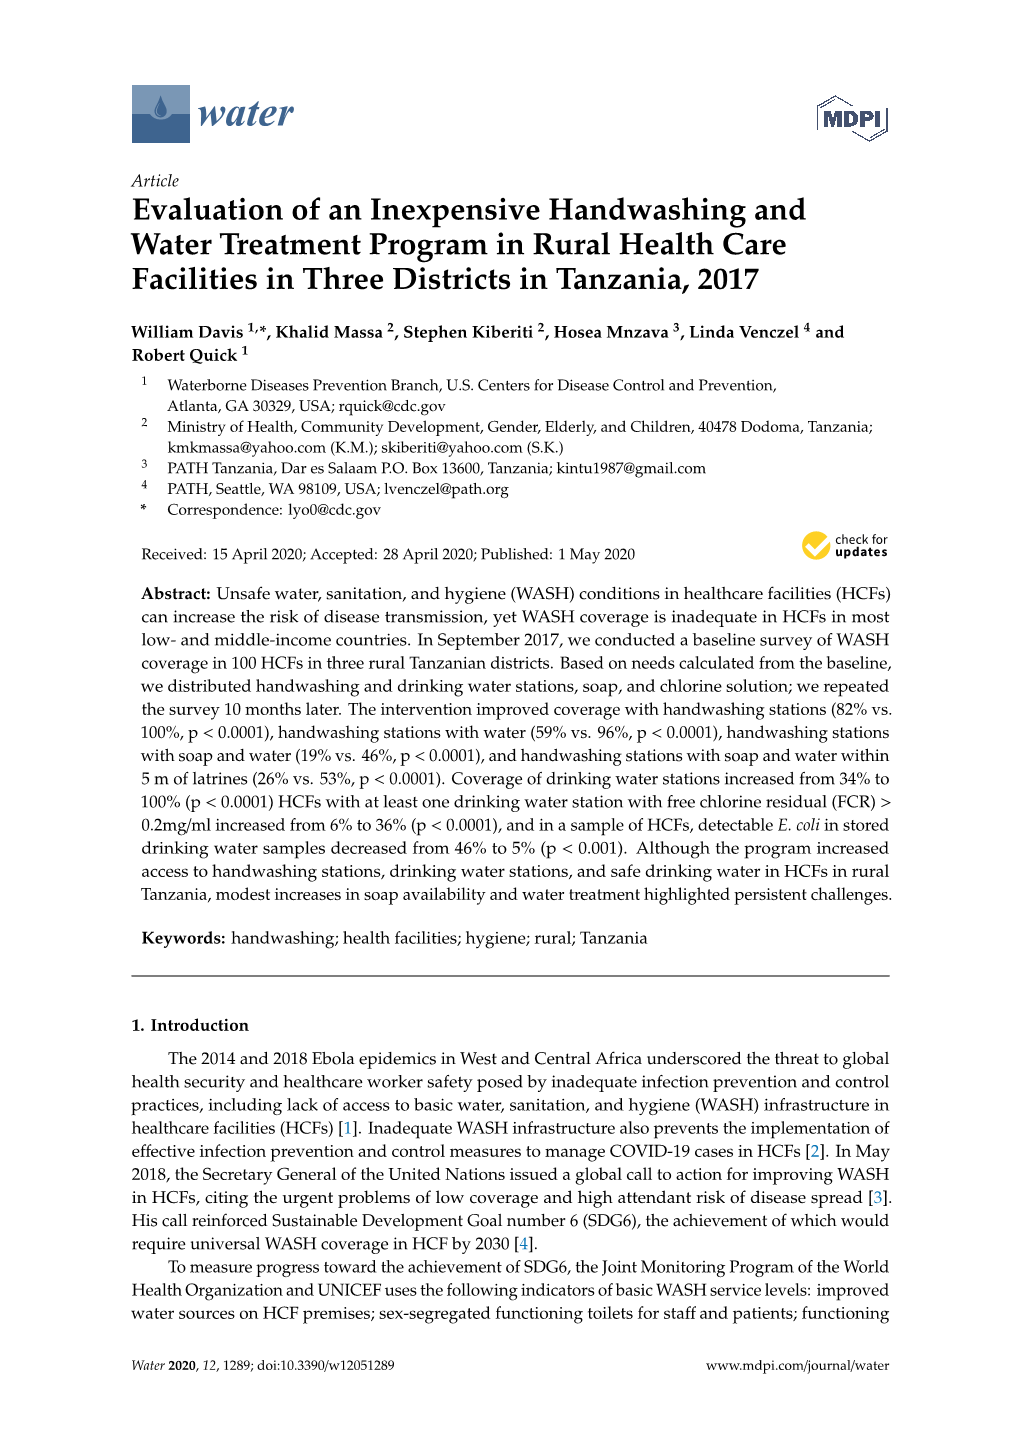 Evaluation of an Inexpensive Handwashing and Water Treatment Program in Rural Health Care Facilities in Three Districts in Tanzania, 2017